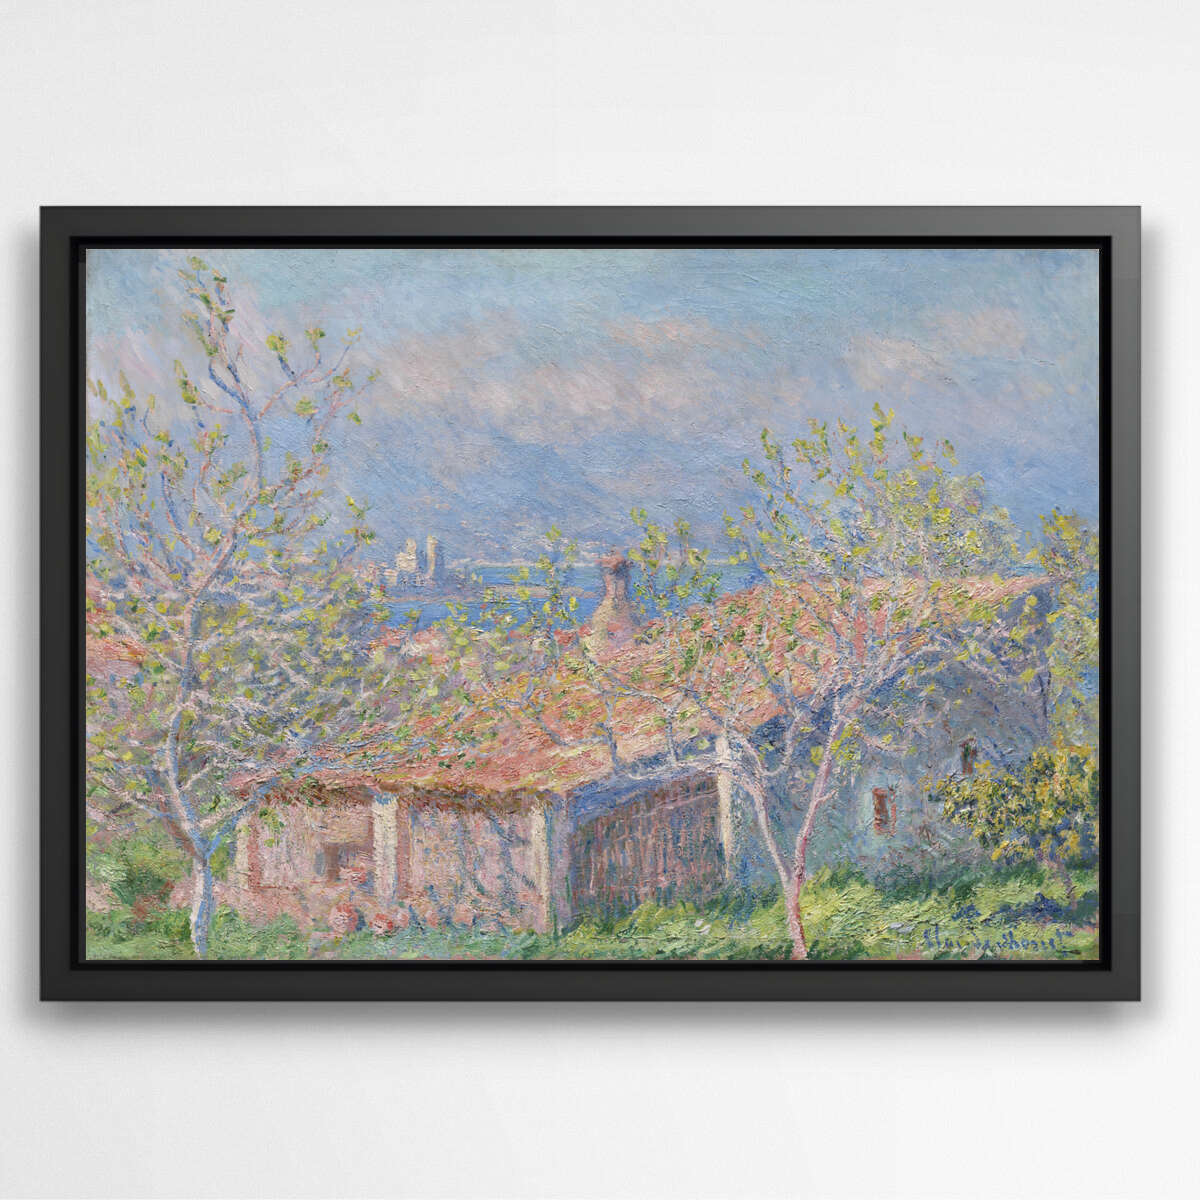 Gardener's House at Antibes by Claude Monet | Claude Monet Wall Art Prints - The Canvas Hive